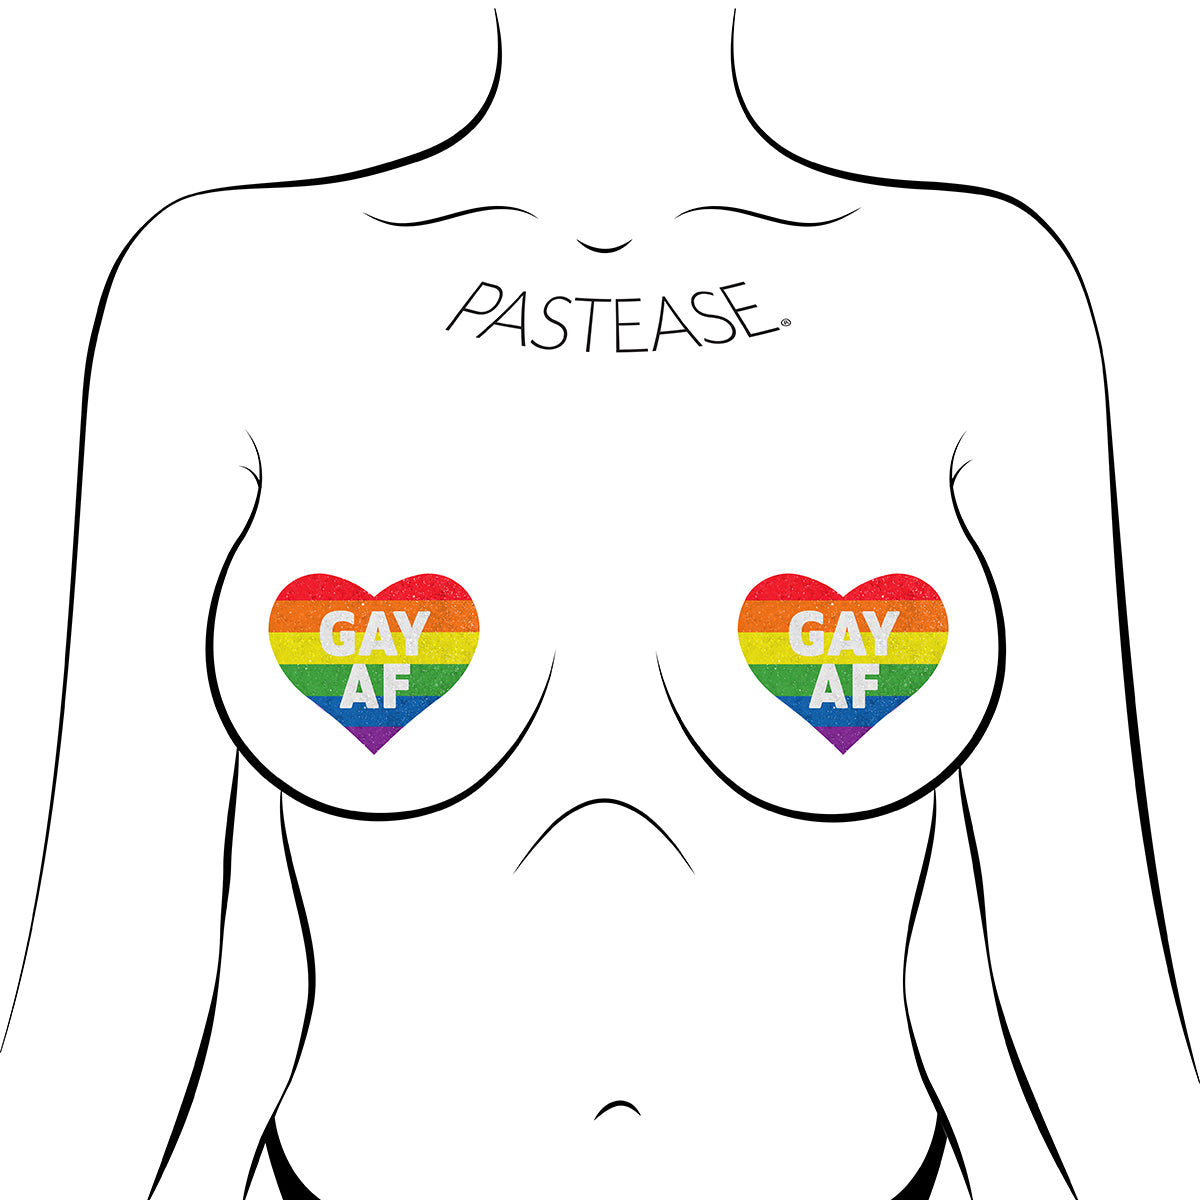 Pastease Gay AF Hearts Intimates Adult Boutique